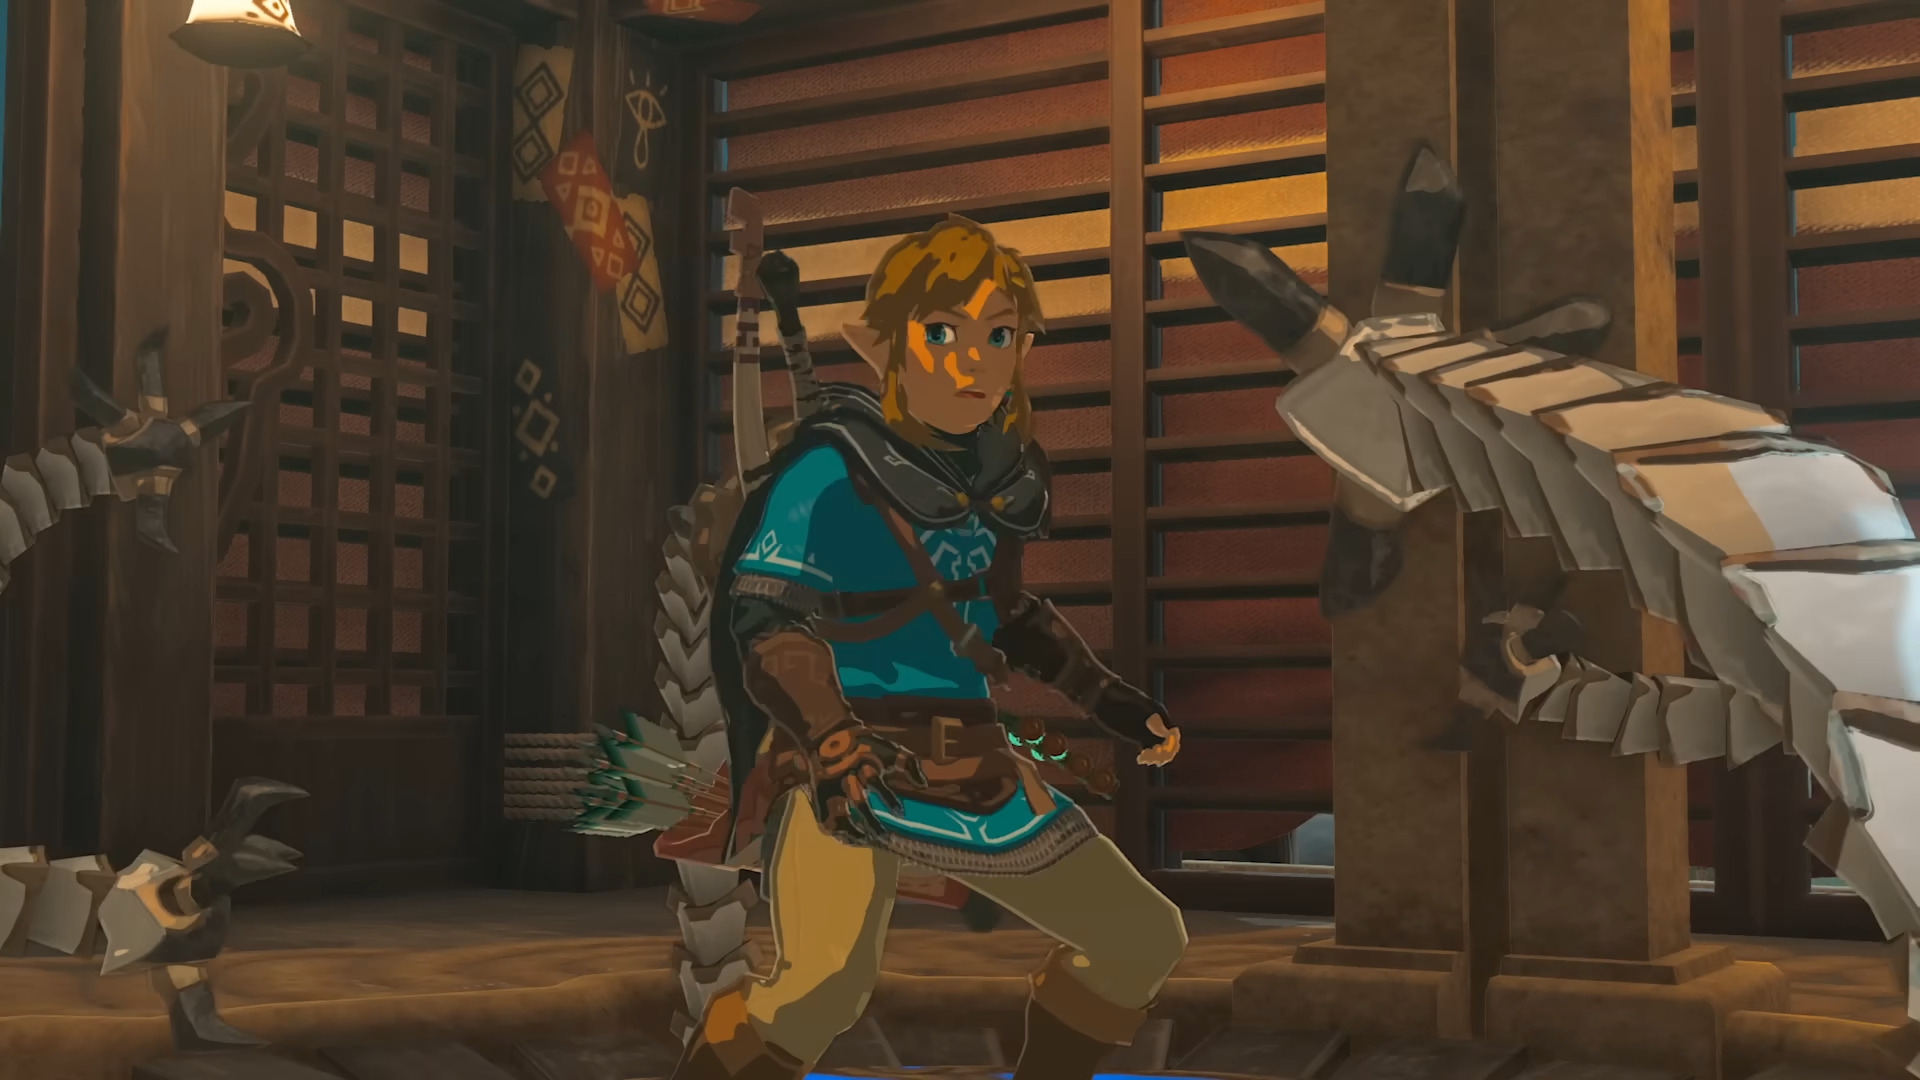 Link looking shocked, surrounded by the arms. He is inside what resembles a Sheikah building